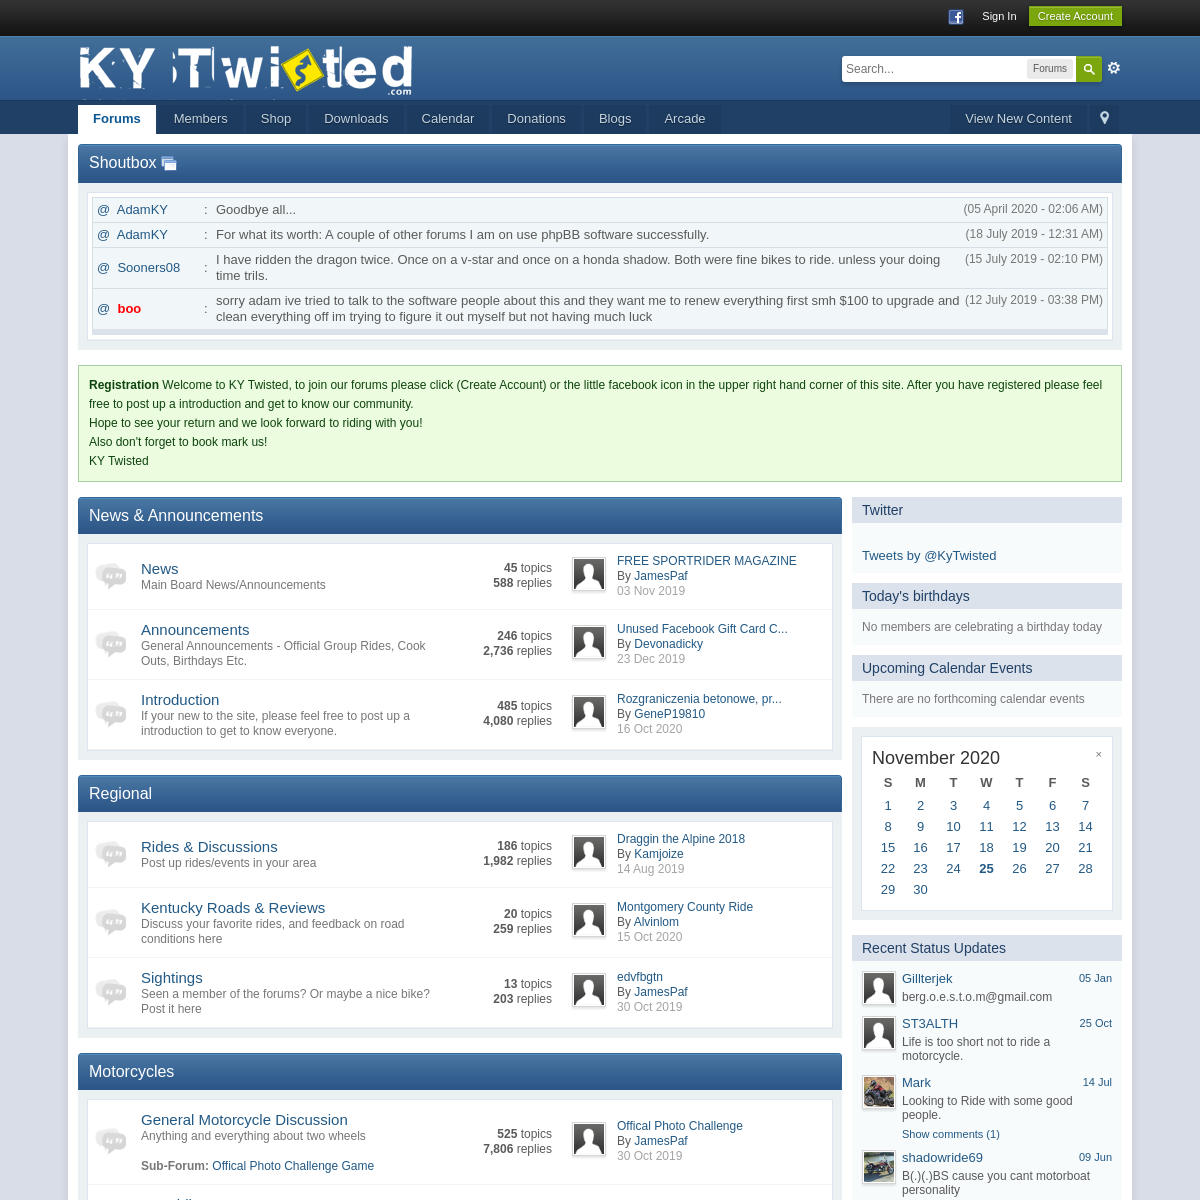 A complete backup of kytwisted.com